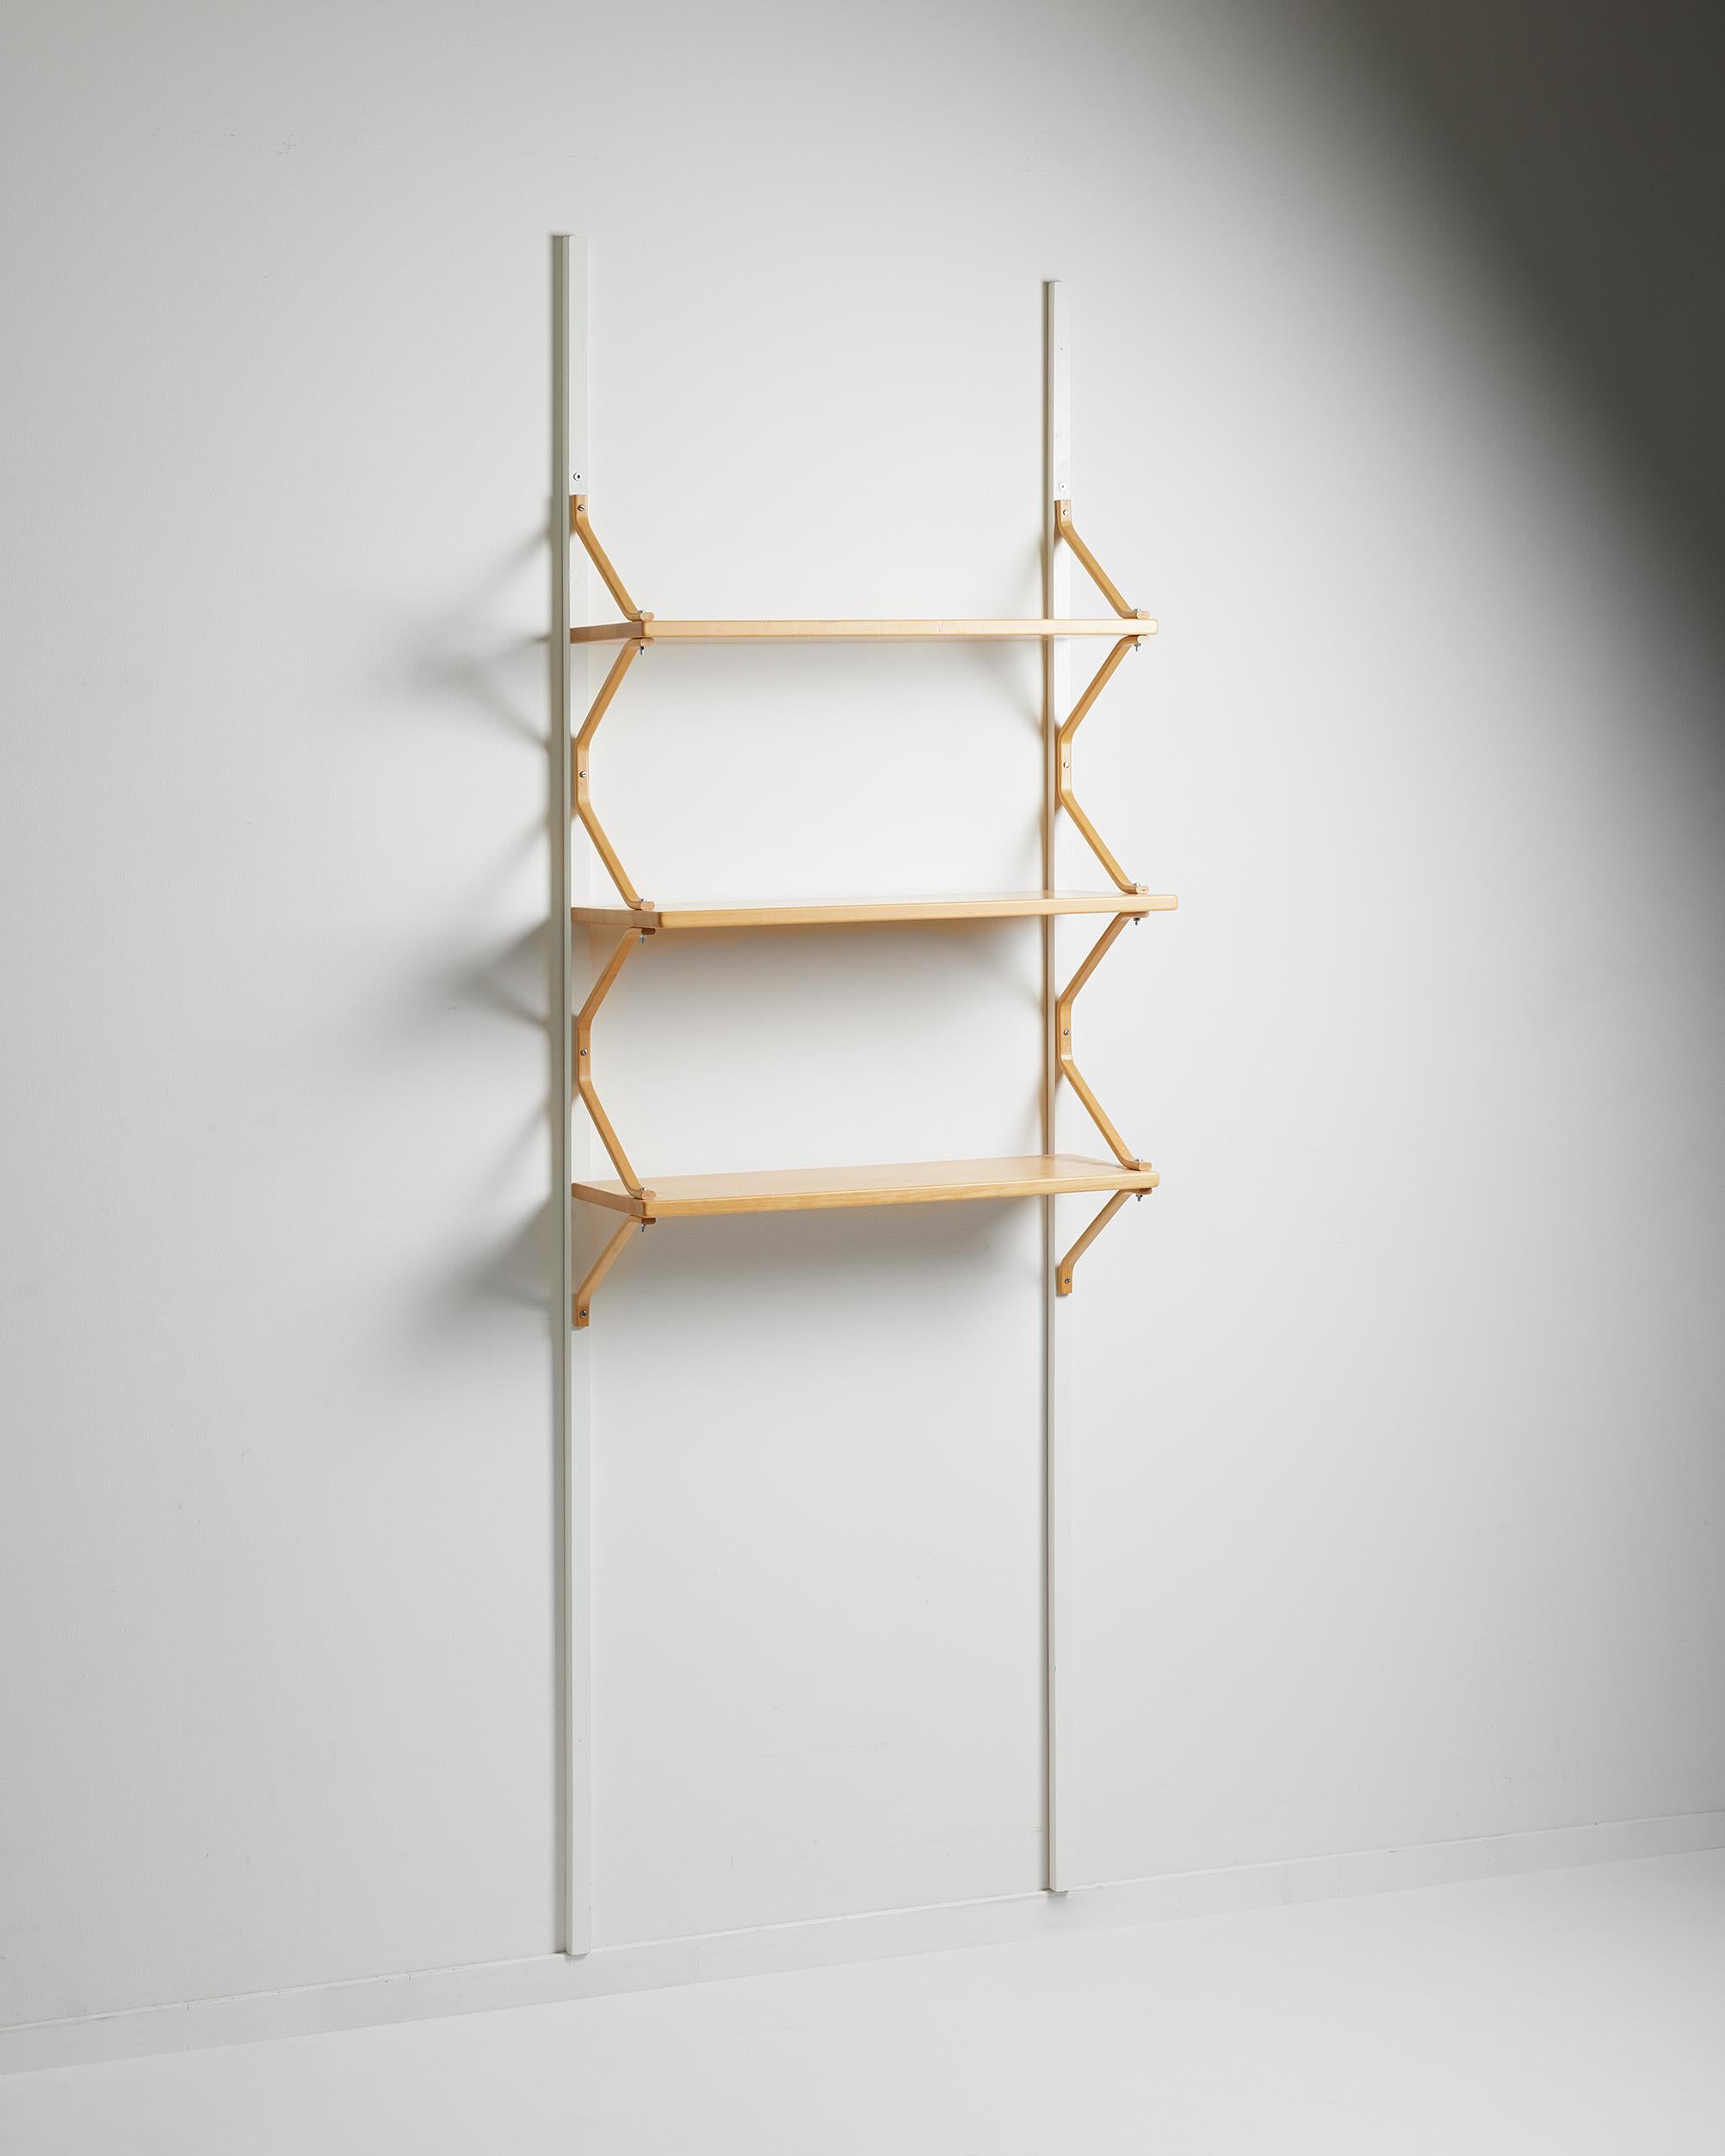 Shelving systems designed by Bruno Mathsson for Mathsson International,
Sweden, 1960s.

Pine and lacquered wood.

Measures: H: 211 cm / 6' 11''
W: 70 cm / 2' 3 1/2''
D: 30 cm / 11 3/4''.